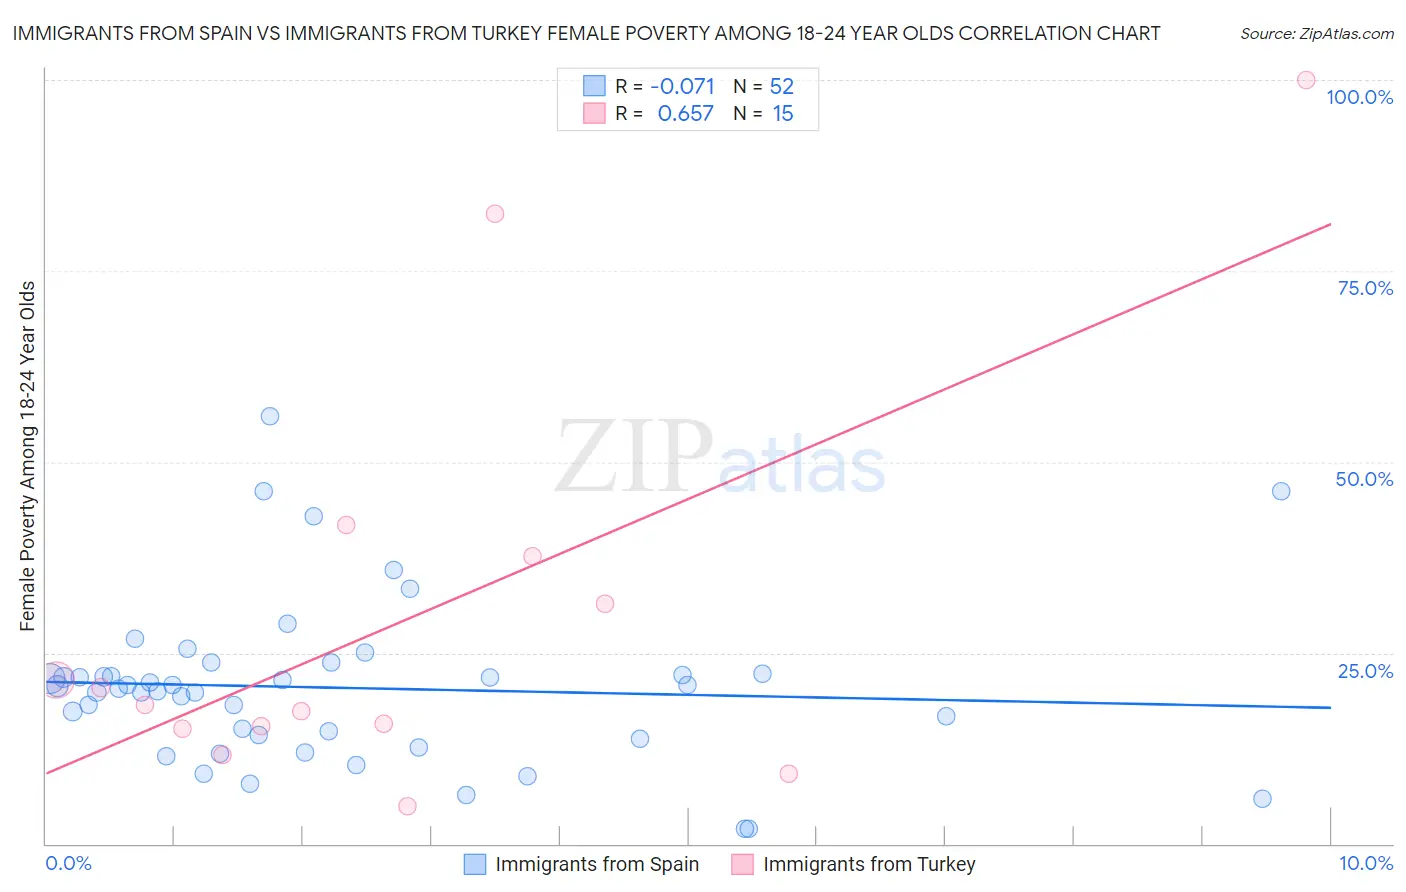 Immigrants from Spain vs Immigrants from Turkey Female Poverty Among 18-24 Year Olds